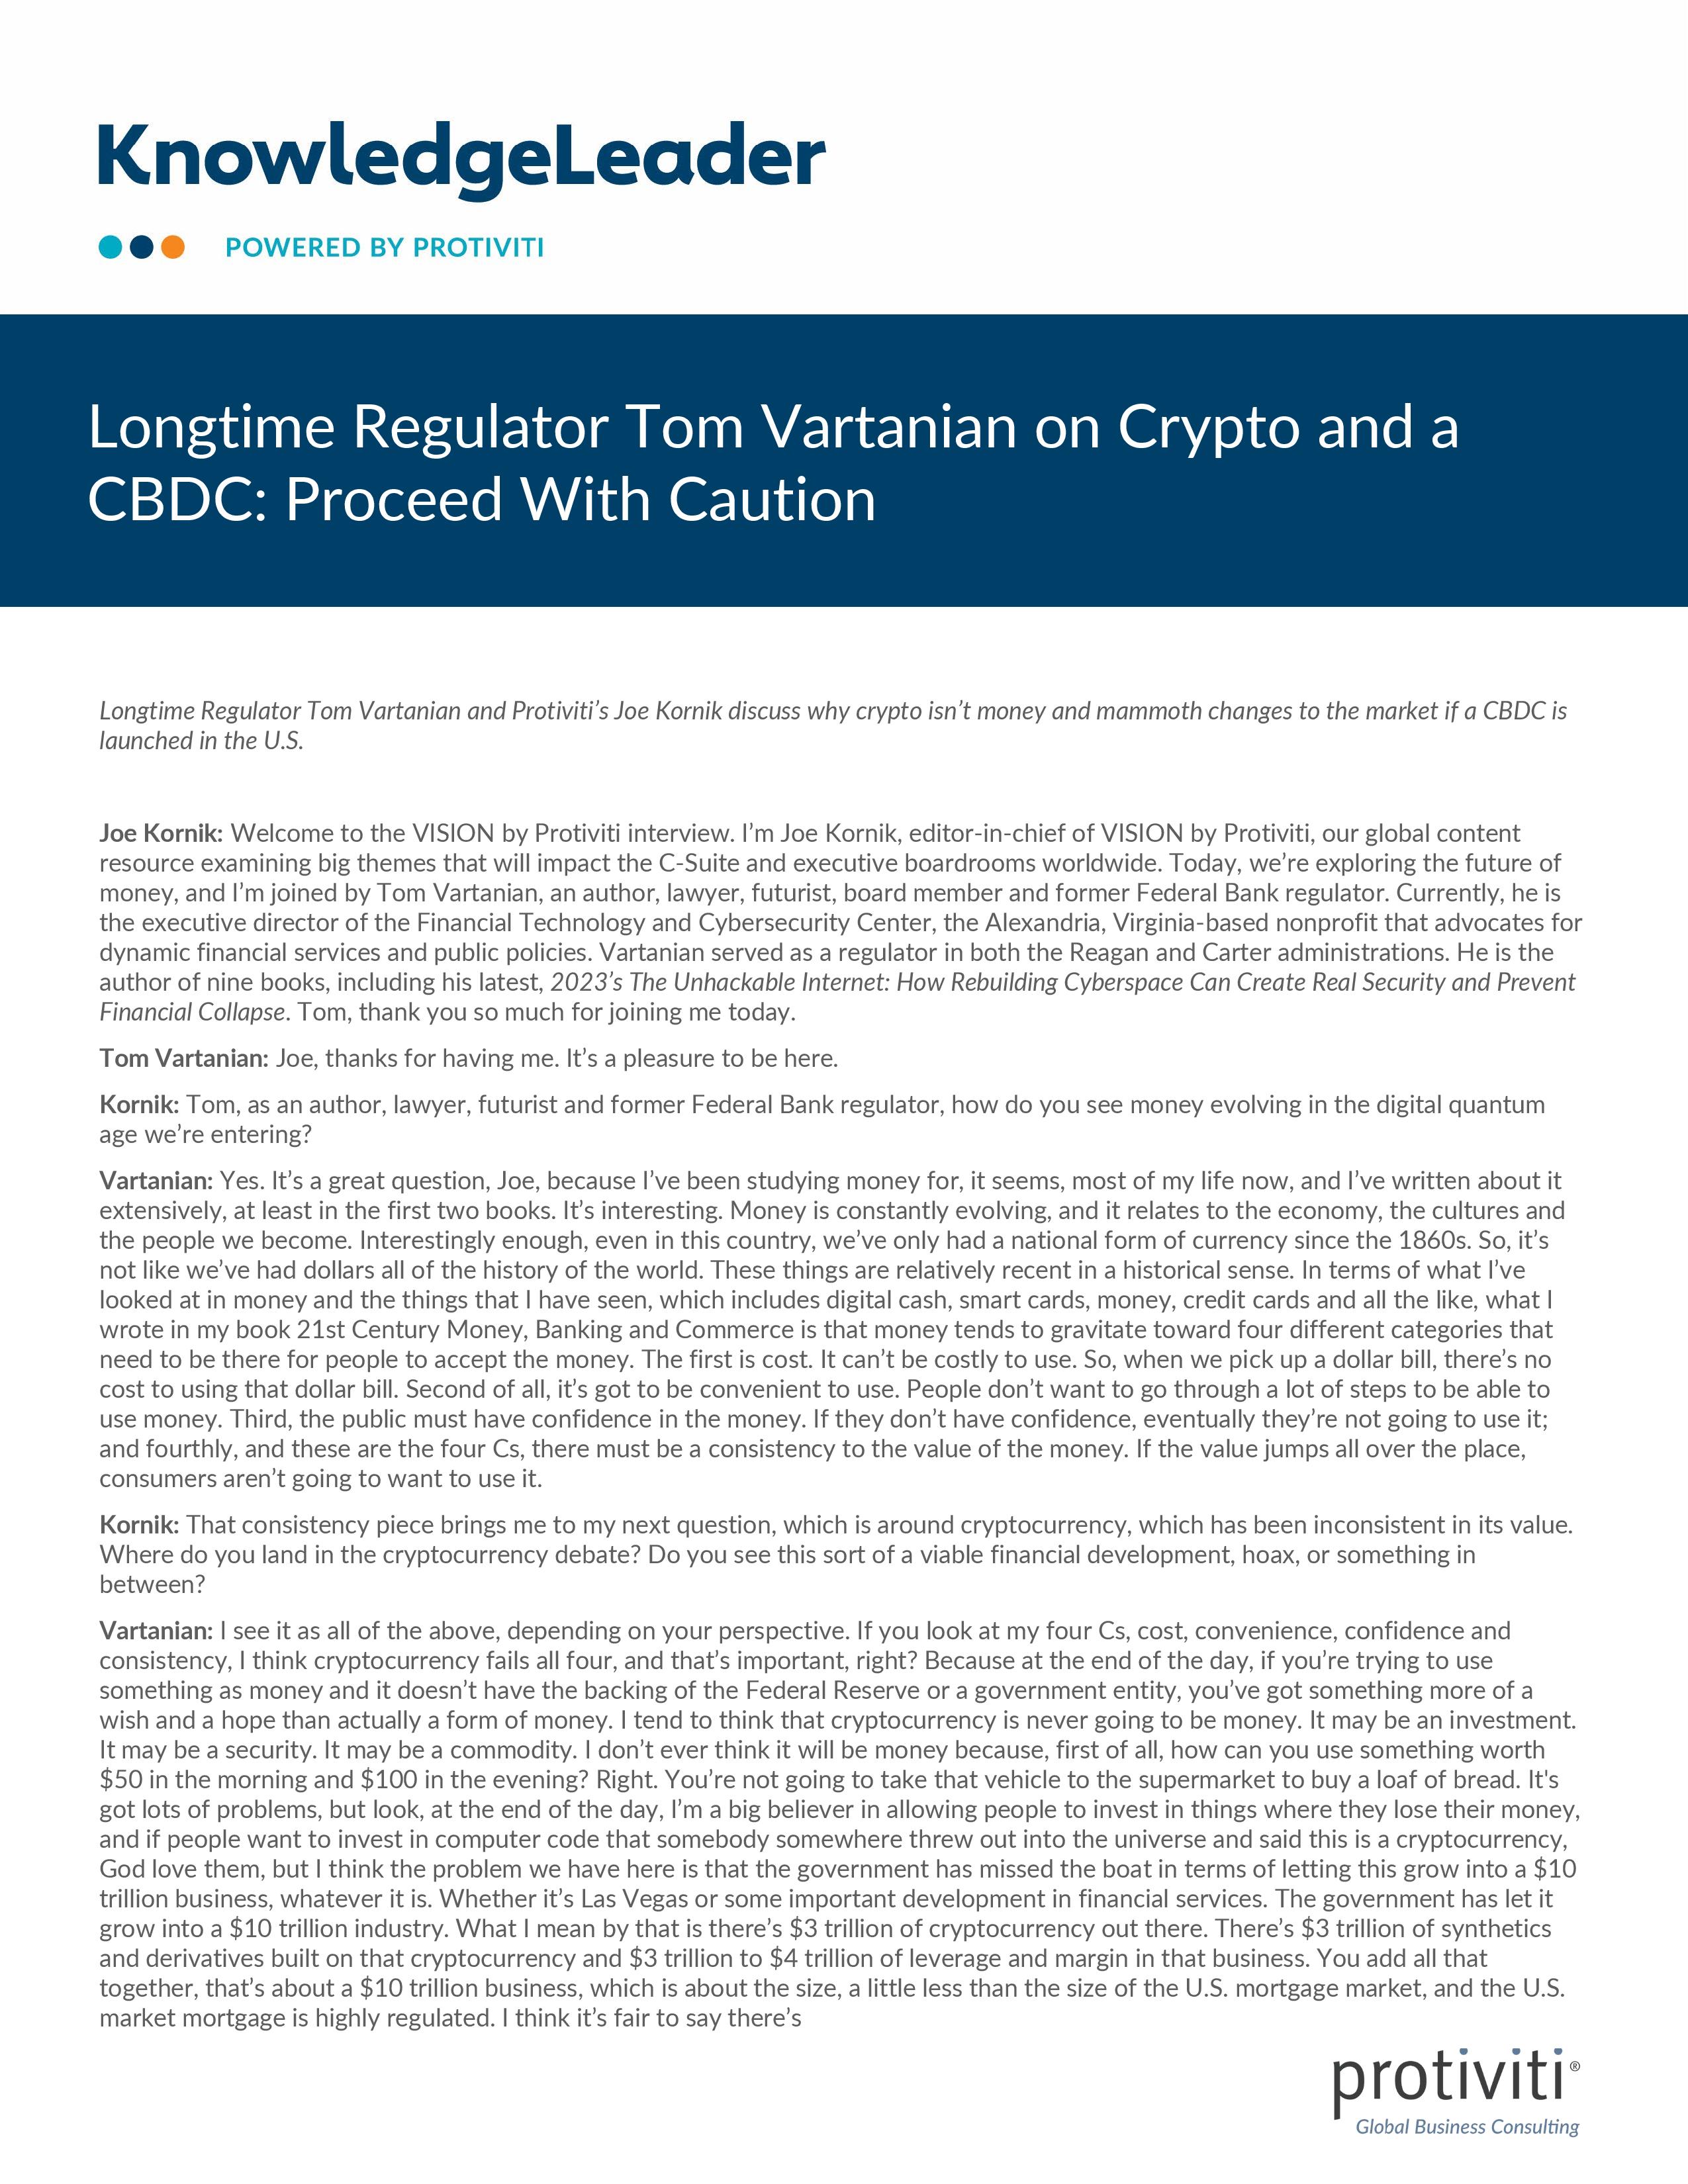 screenshot of the first page of Longtime Regulator Tom Vartanian on Crypto and a CBDC Proceed With Caution